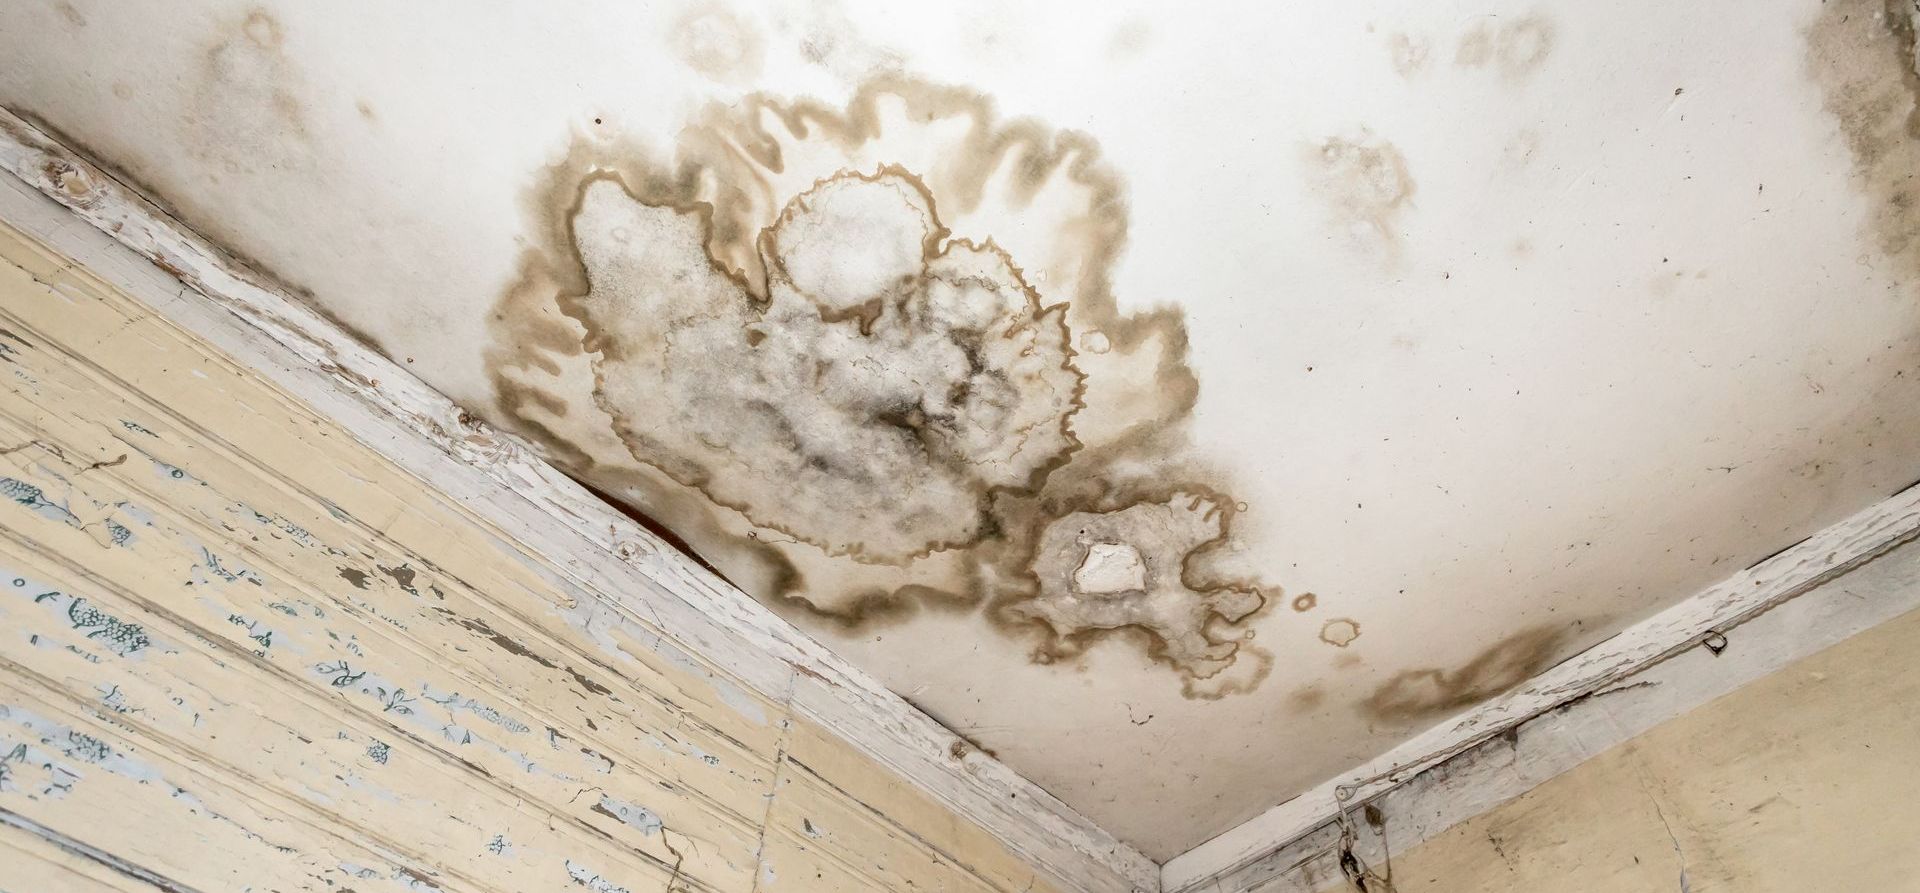 Determining When to Seek Professional Mold Remediation Service